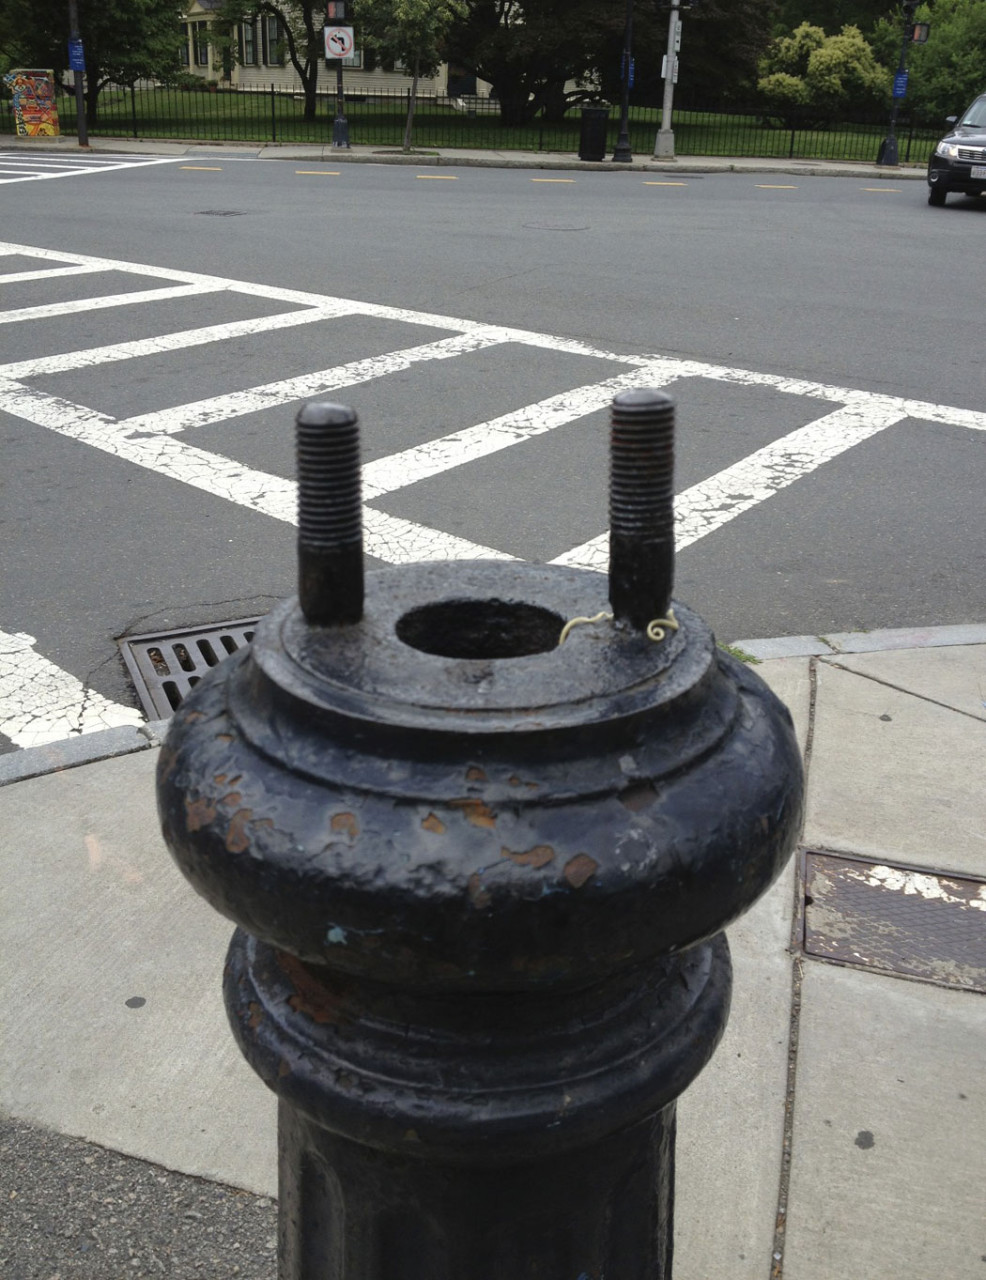 Before: The tempting screws atop the stump of the lamppost in Jamaica Plain’s Monument Square. (Courtesy)